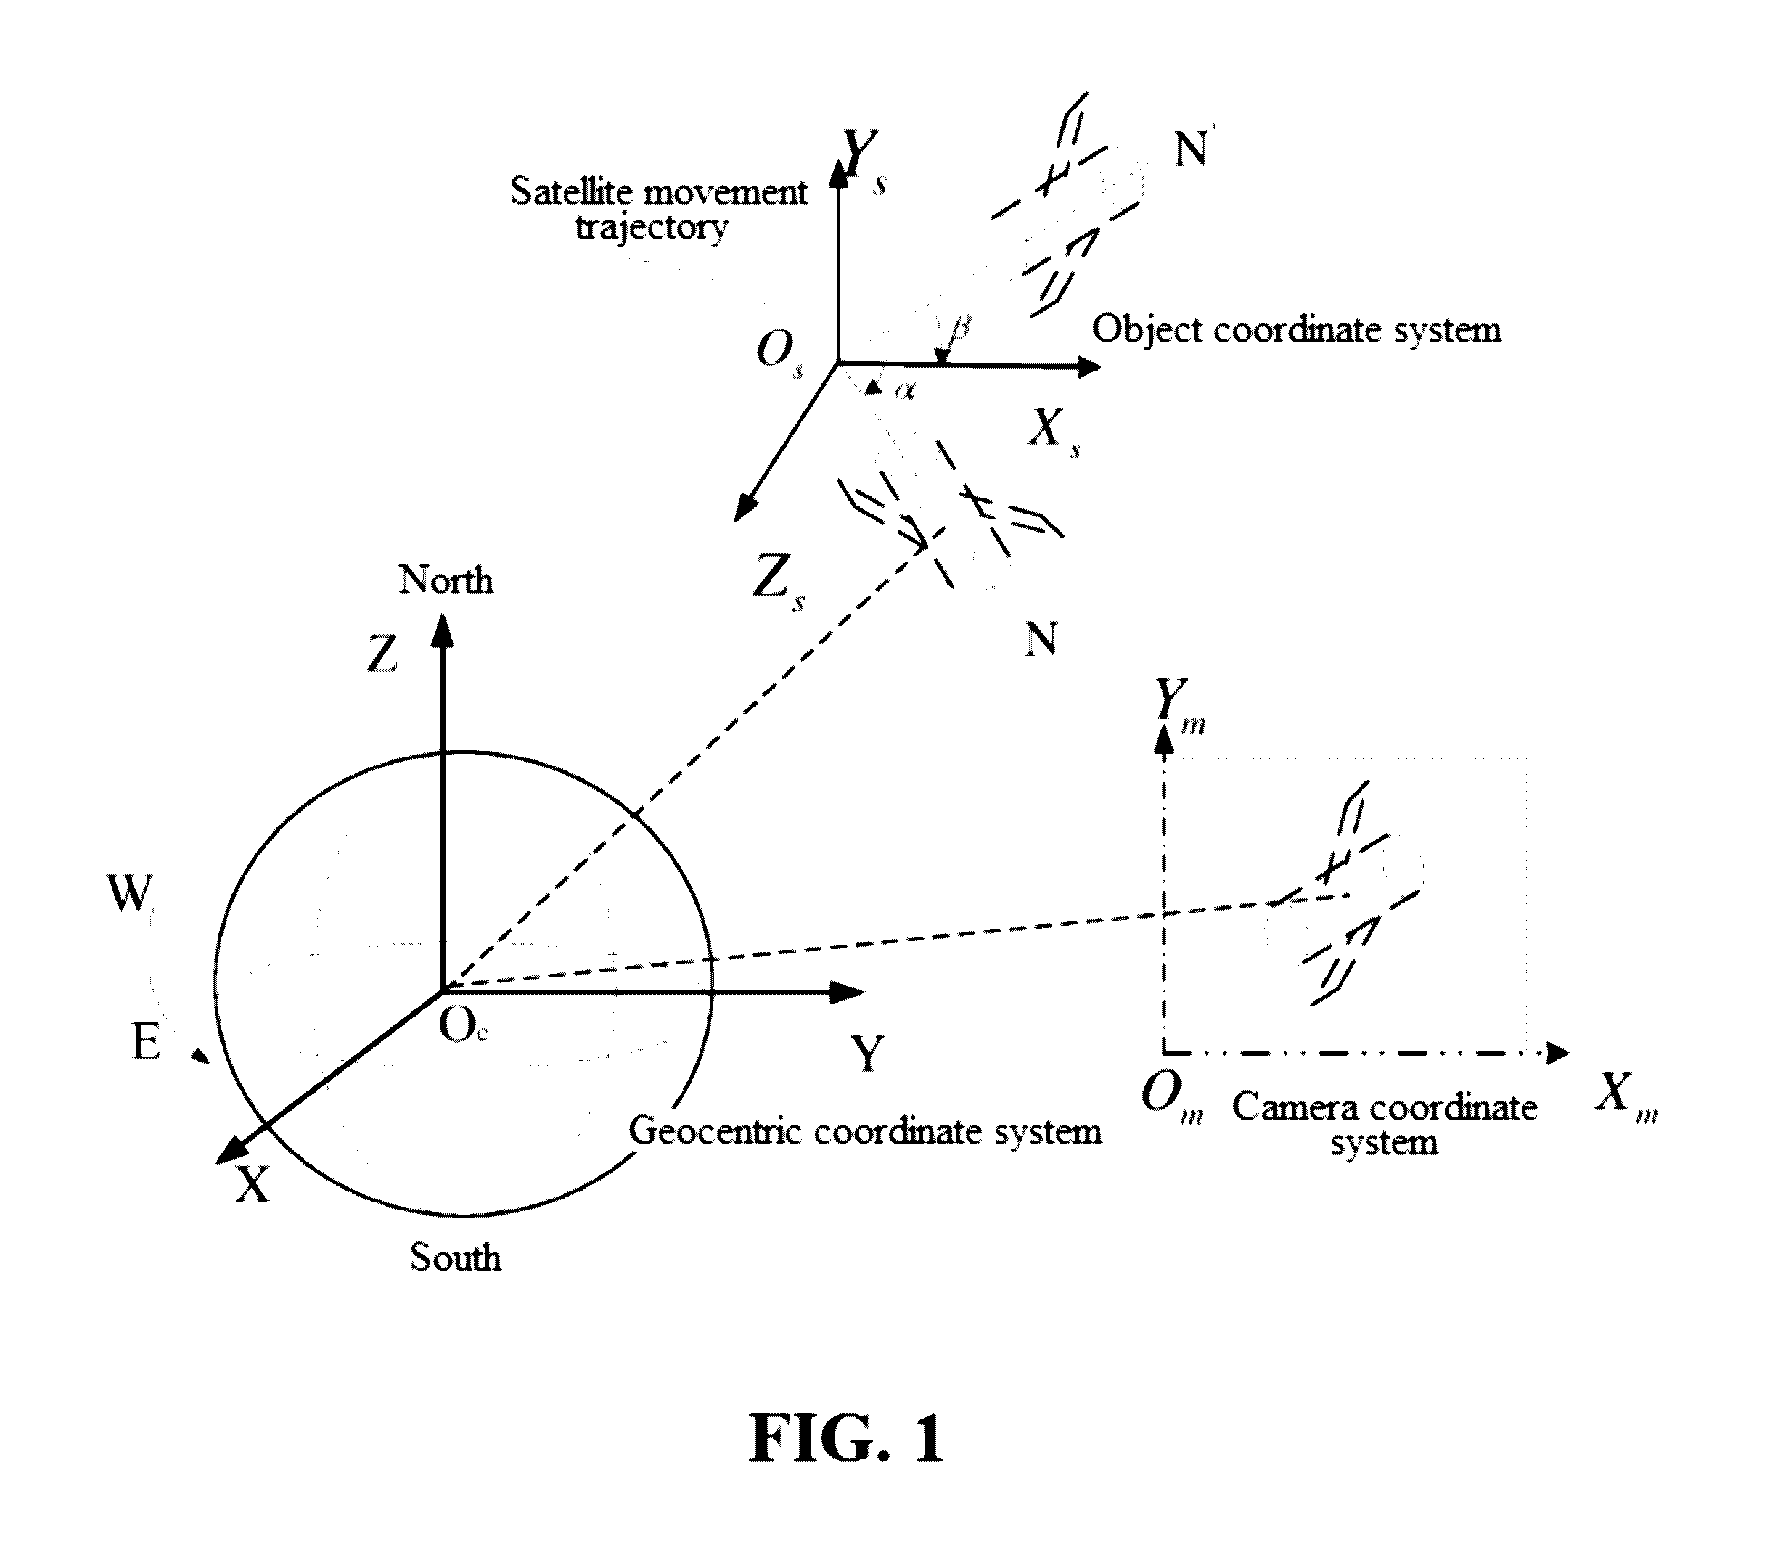 Attitude estimation method and system for on-orbit three-dimensional space object under model restraint